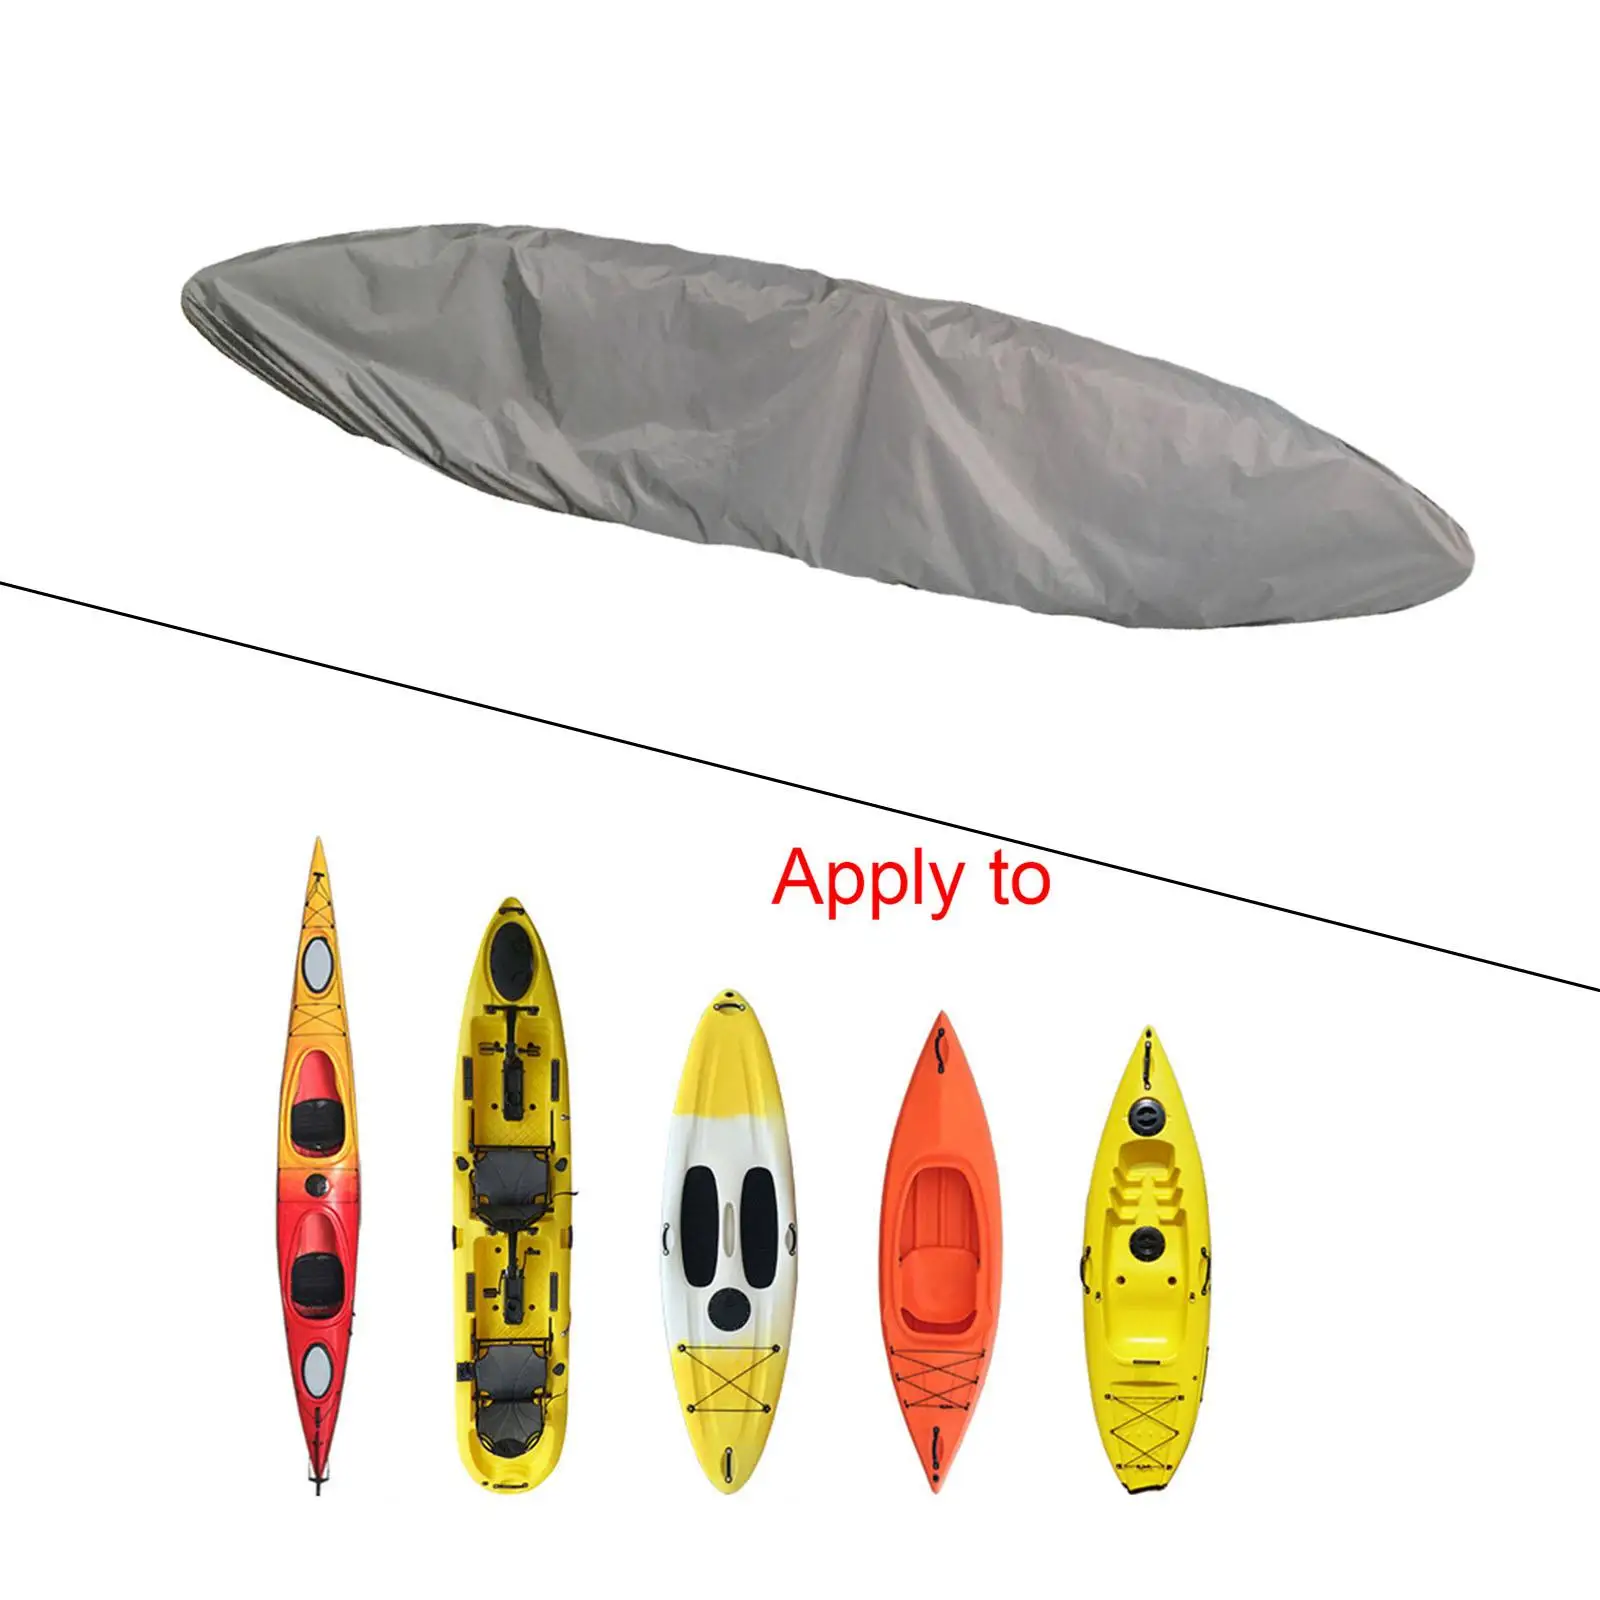 Kayak Cover Waterproof Canoe Cover Protector Oxford Cloth Boat Storage Cover 350cm